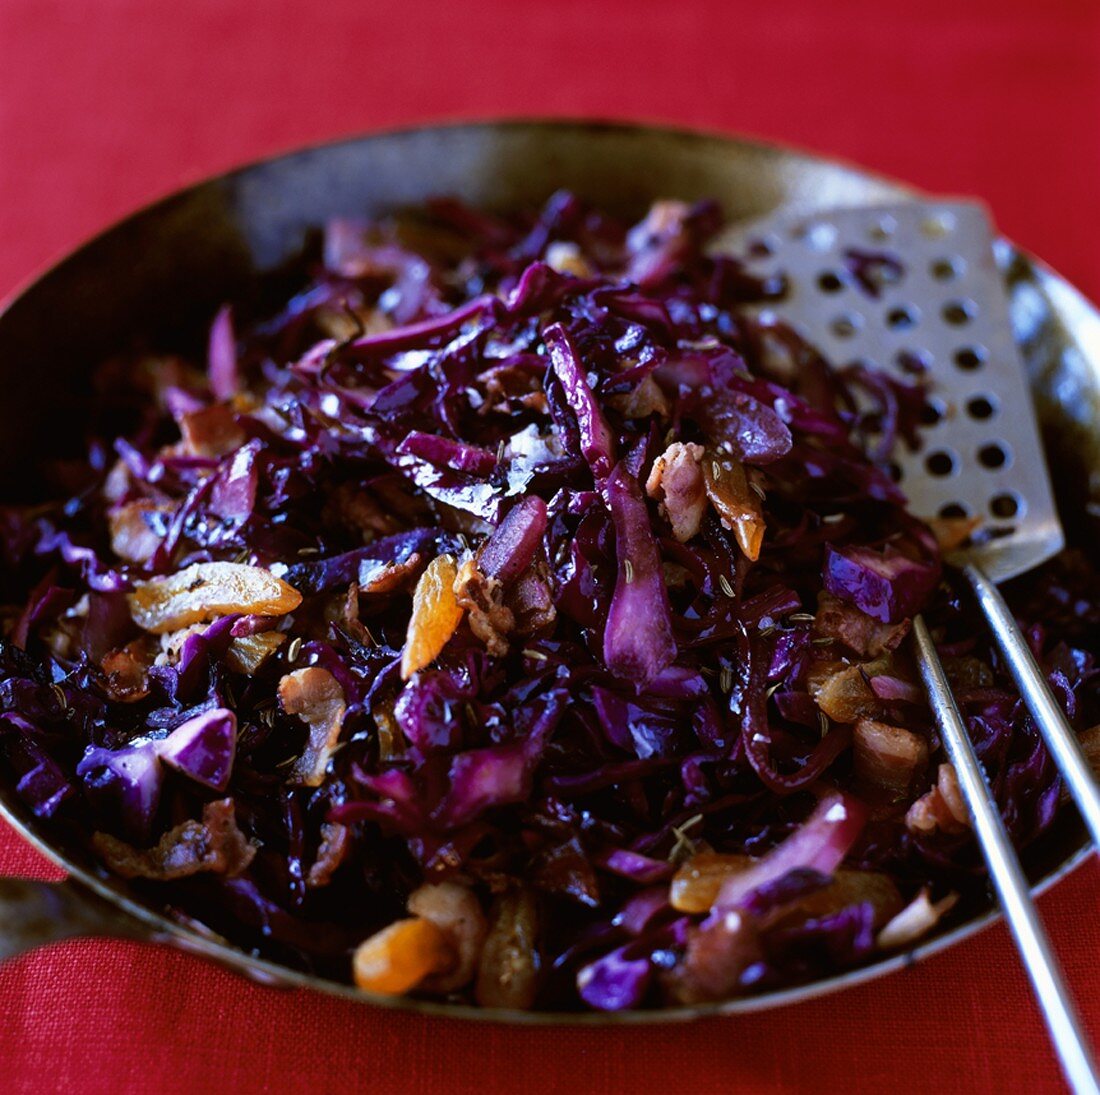 Red cabbage (side dish)